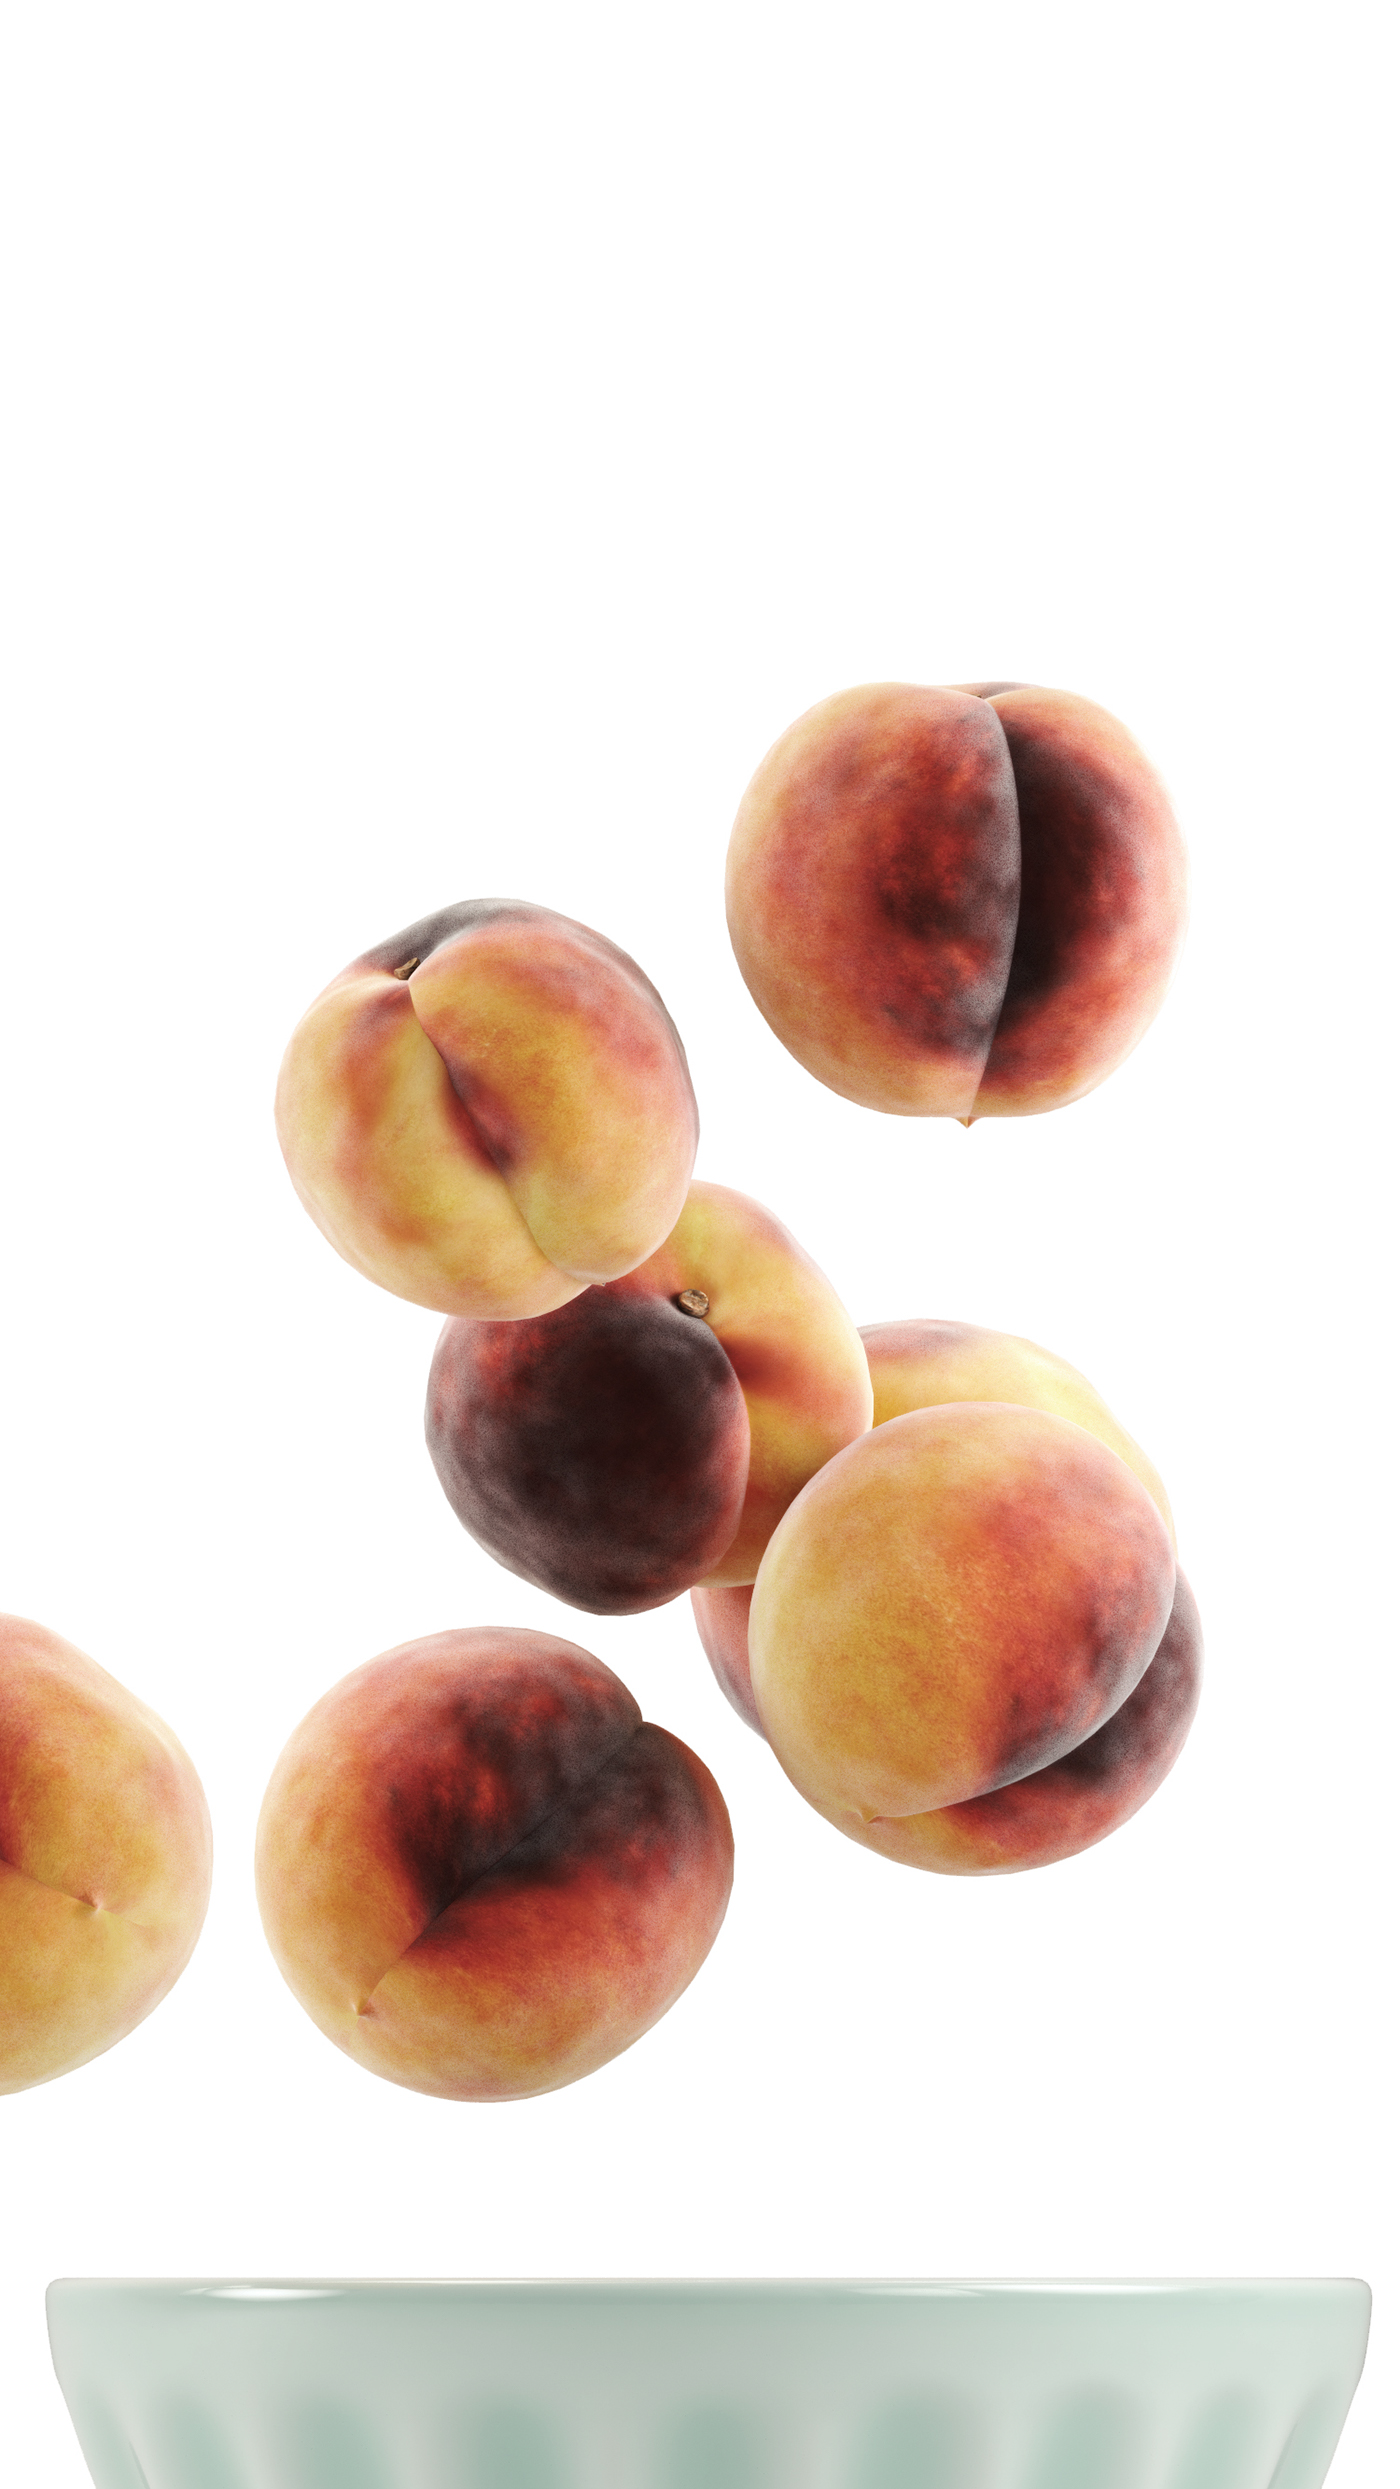 3ds max vray peach photoshop